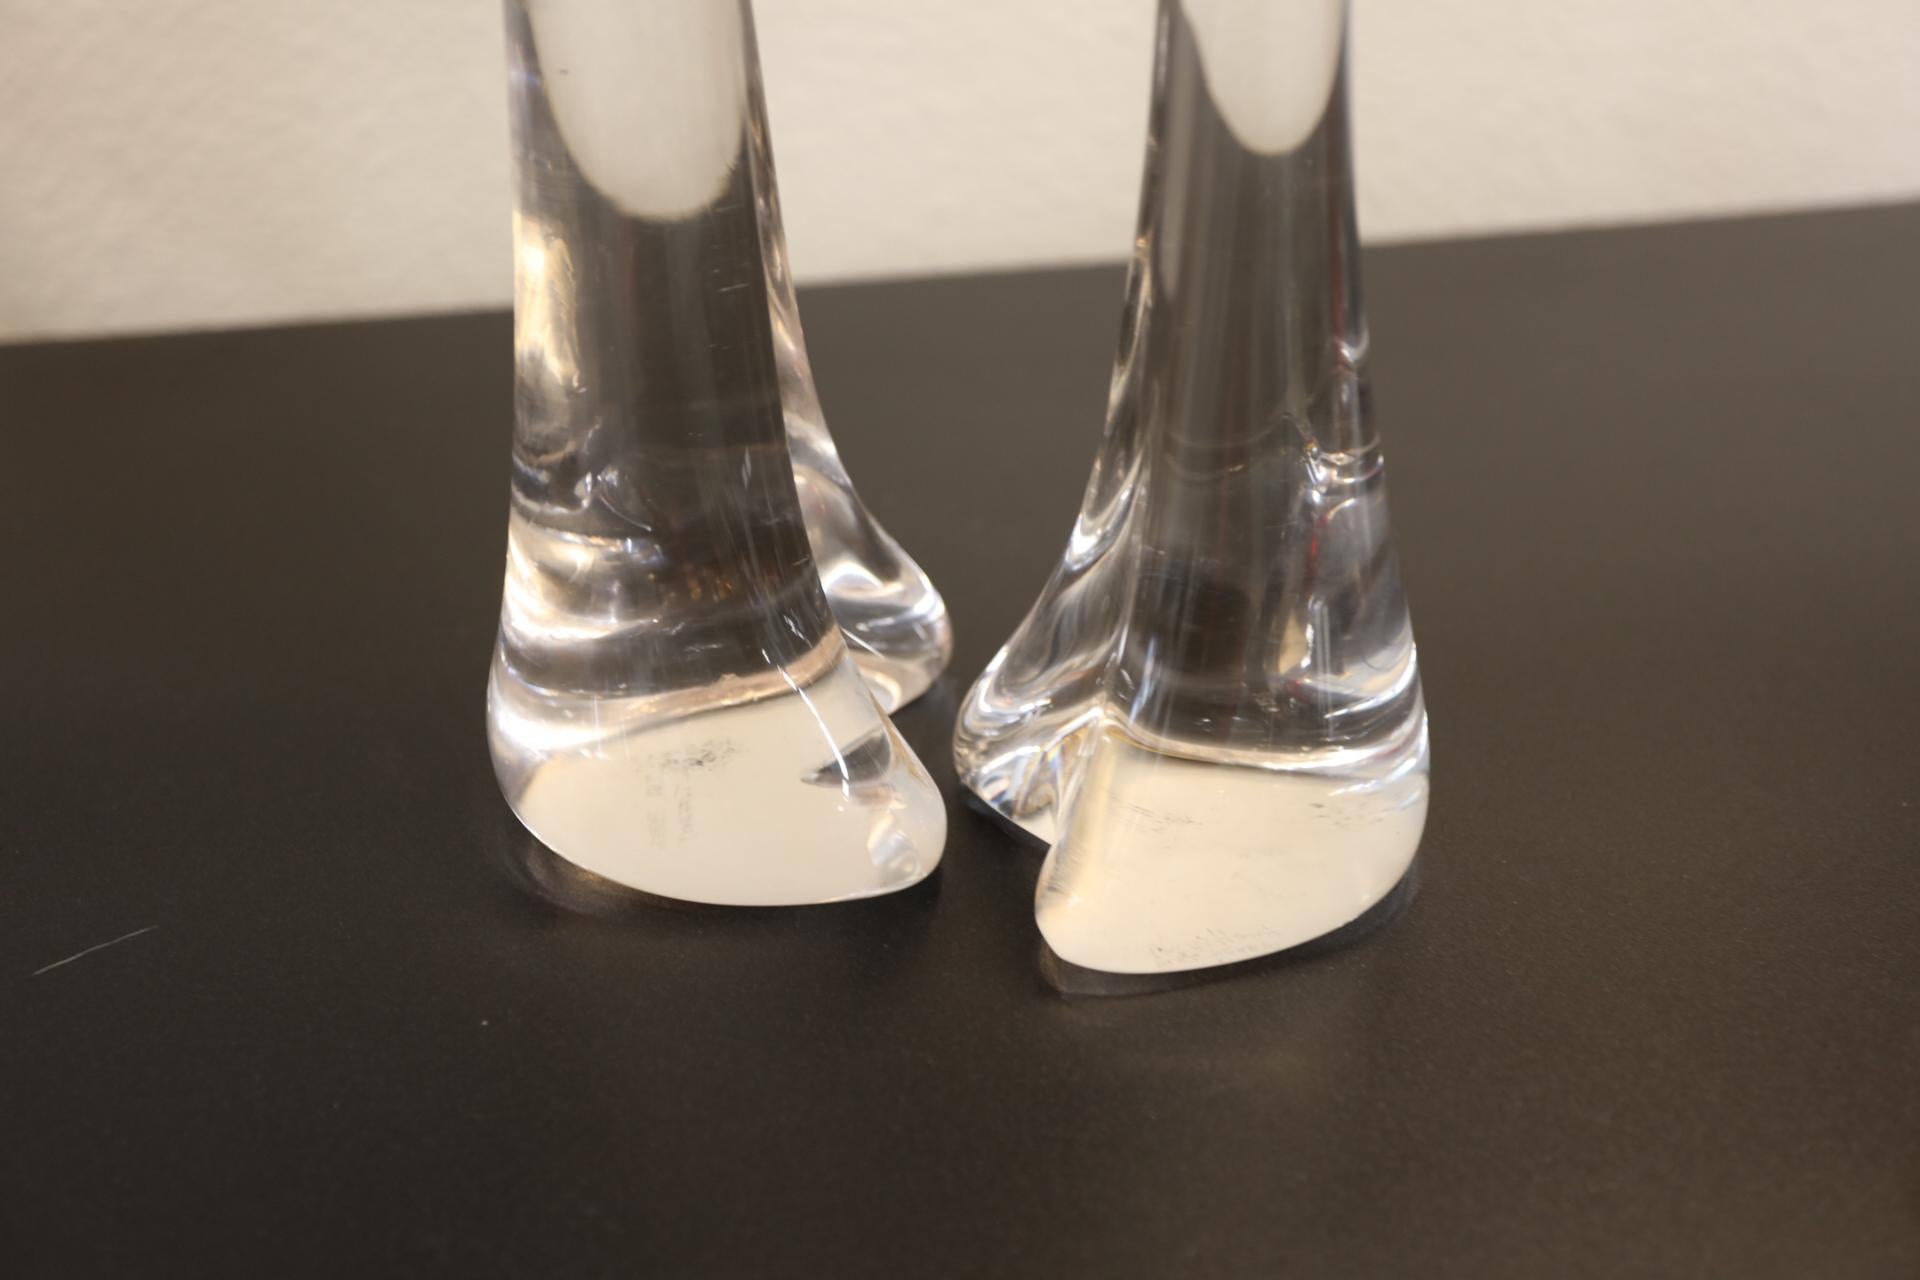 Lovely pair of bones glass Candlesticks by Elsa Peretti for Tiffany and Co. These are the largest size made. Both are signed on the base. These are hand made and not entirely the same, their shape is slightly different. In good condition, with no